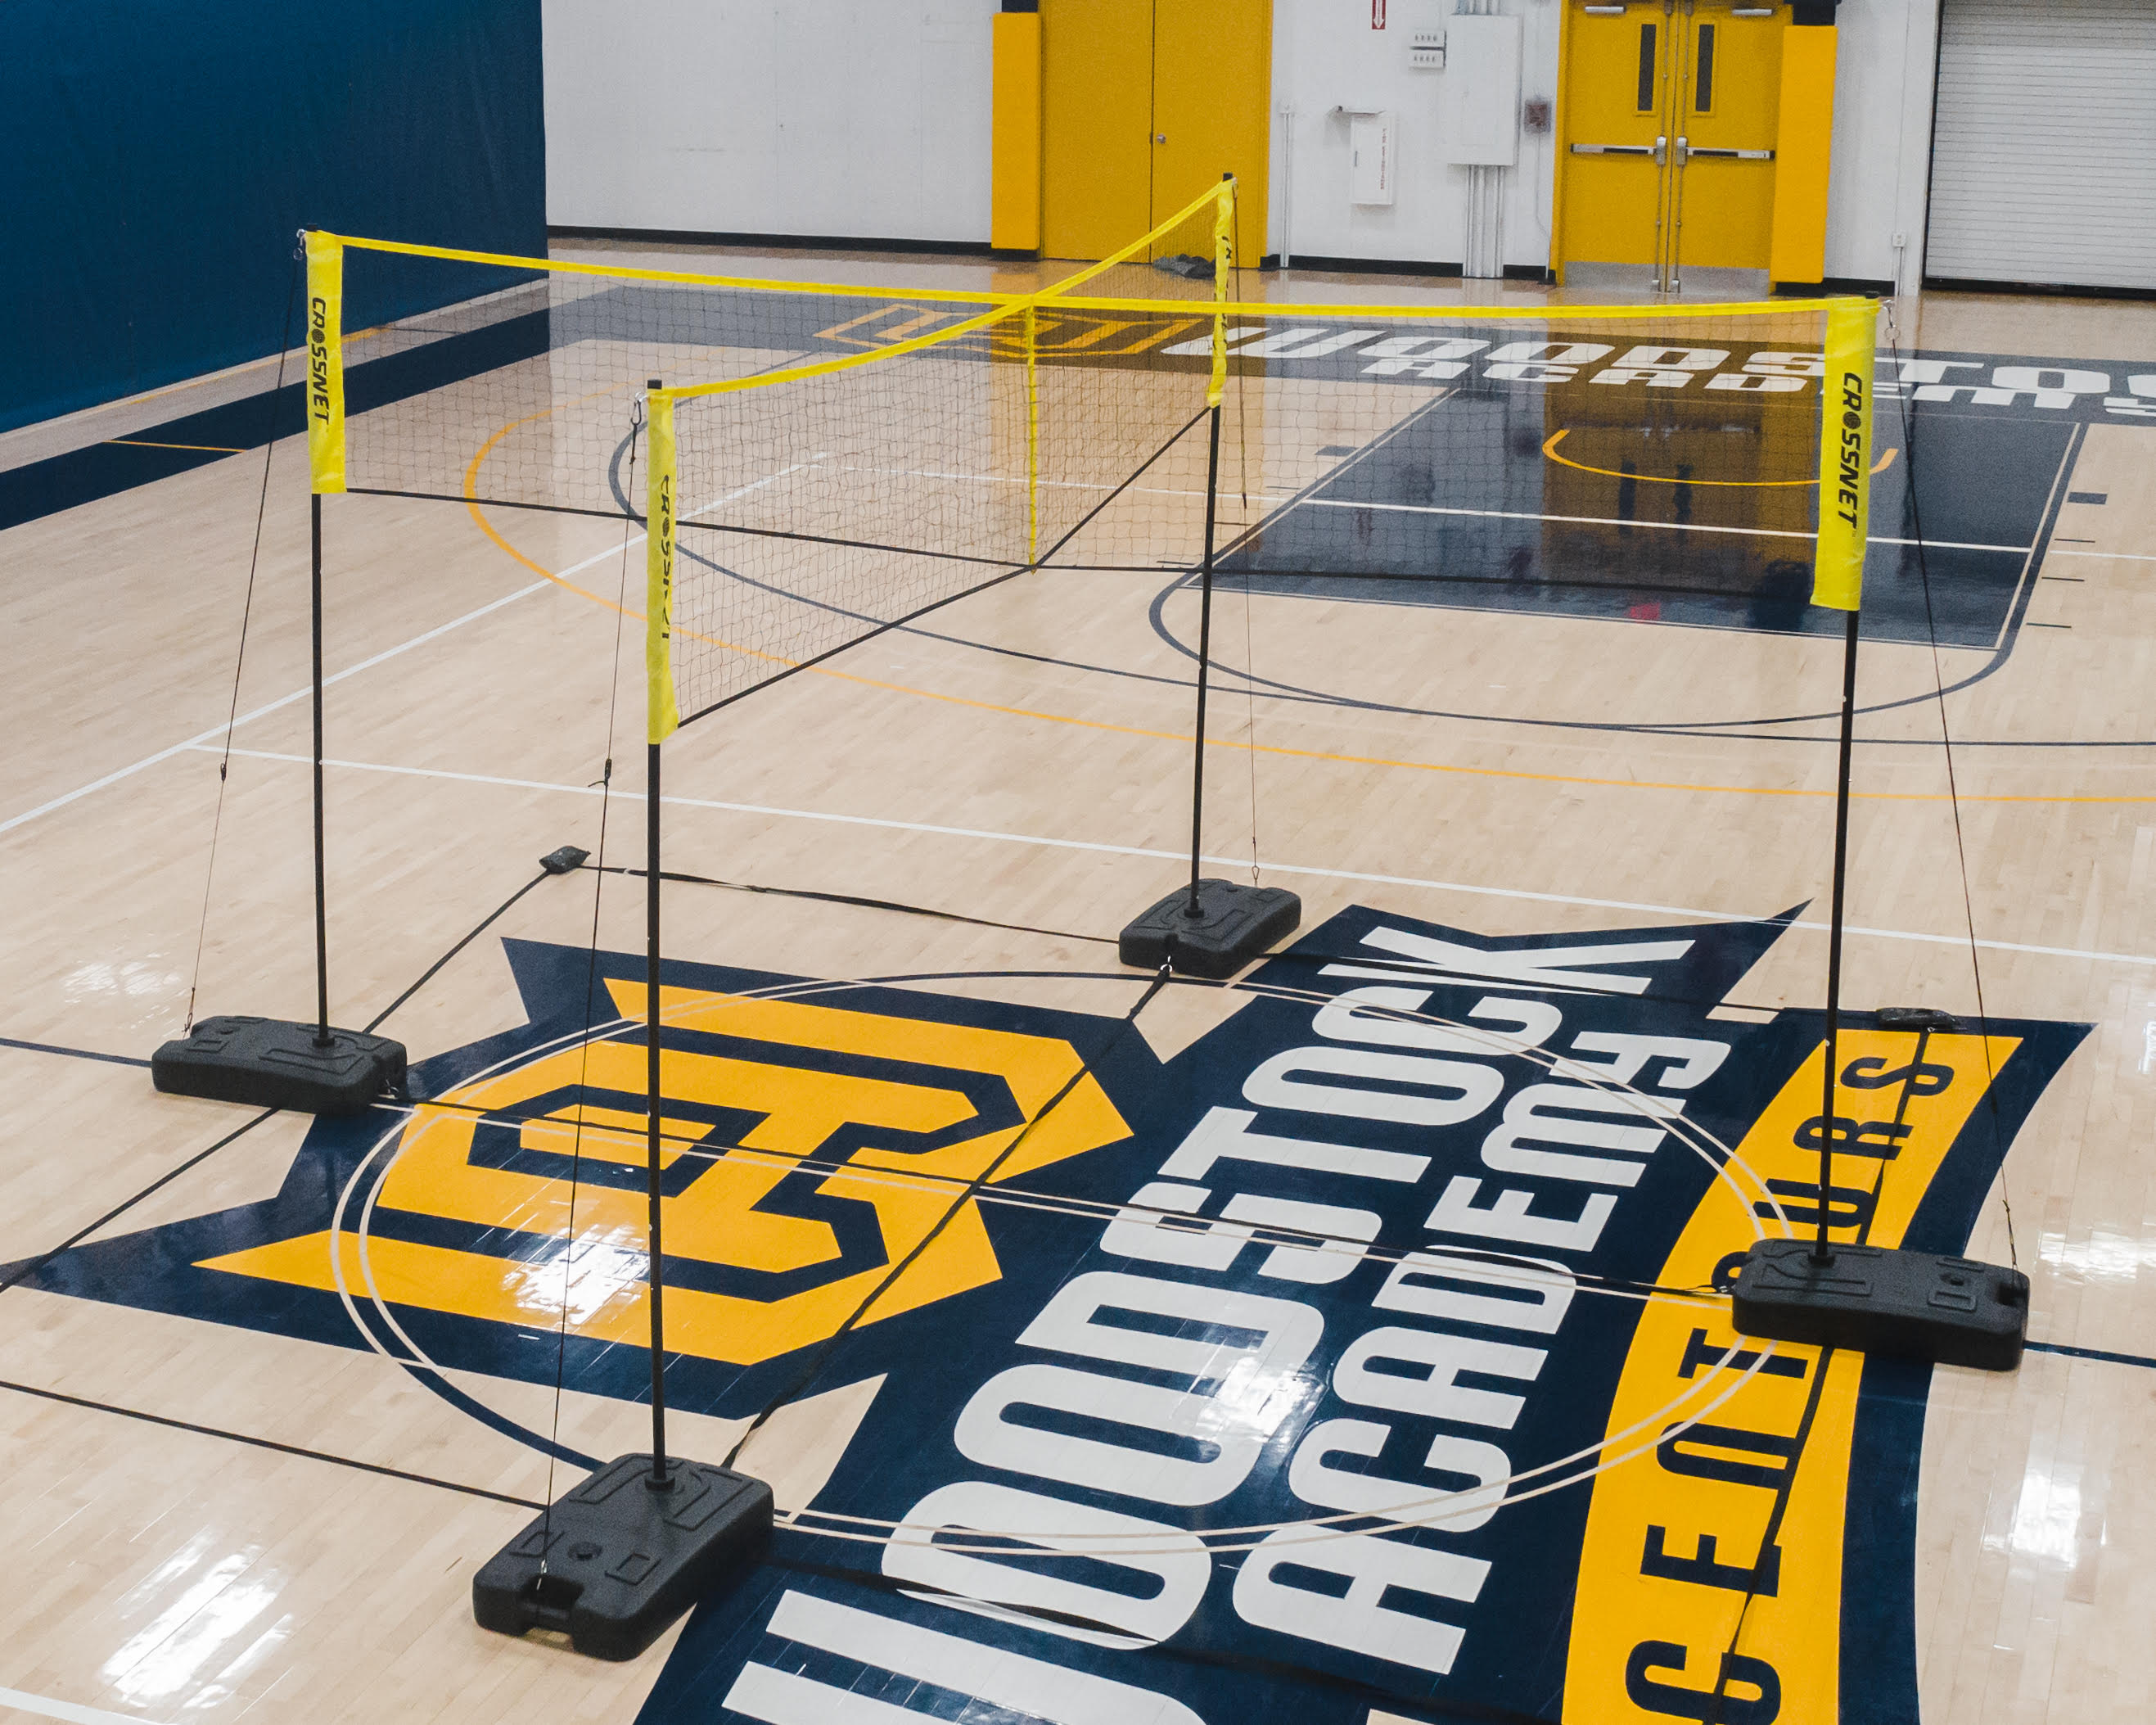 CROSSNET Four Square Volleyball Net - Indoor & Outdoor Sports